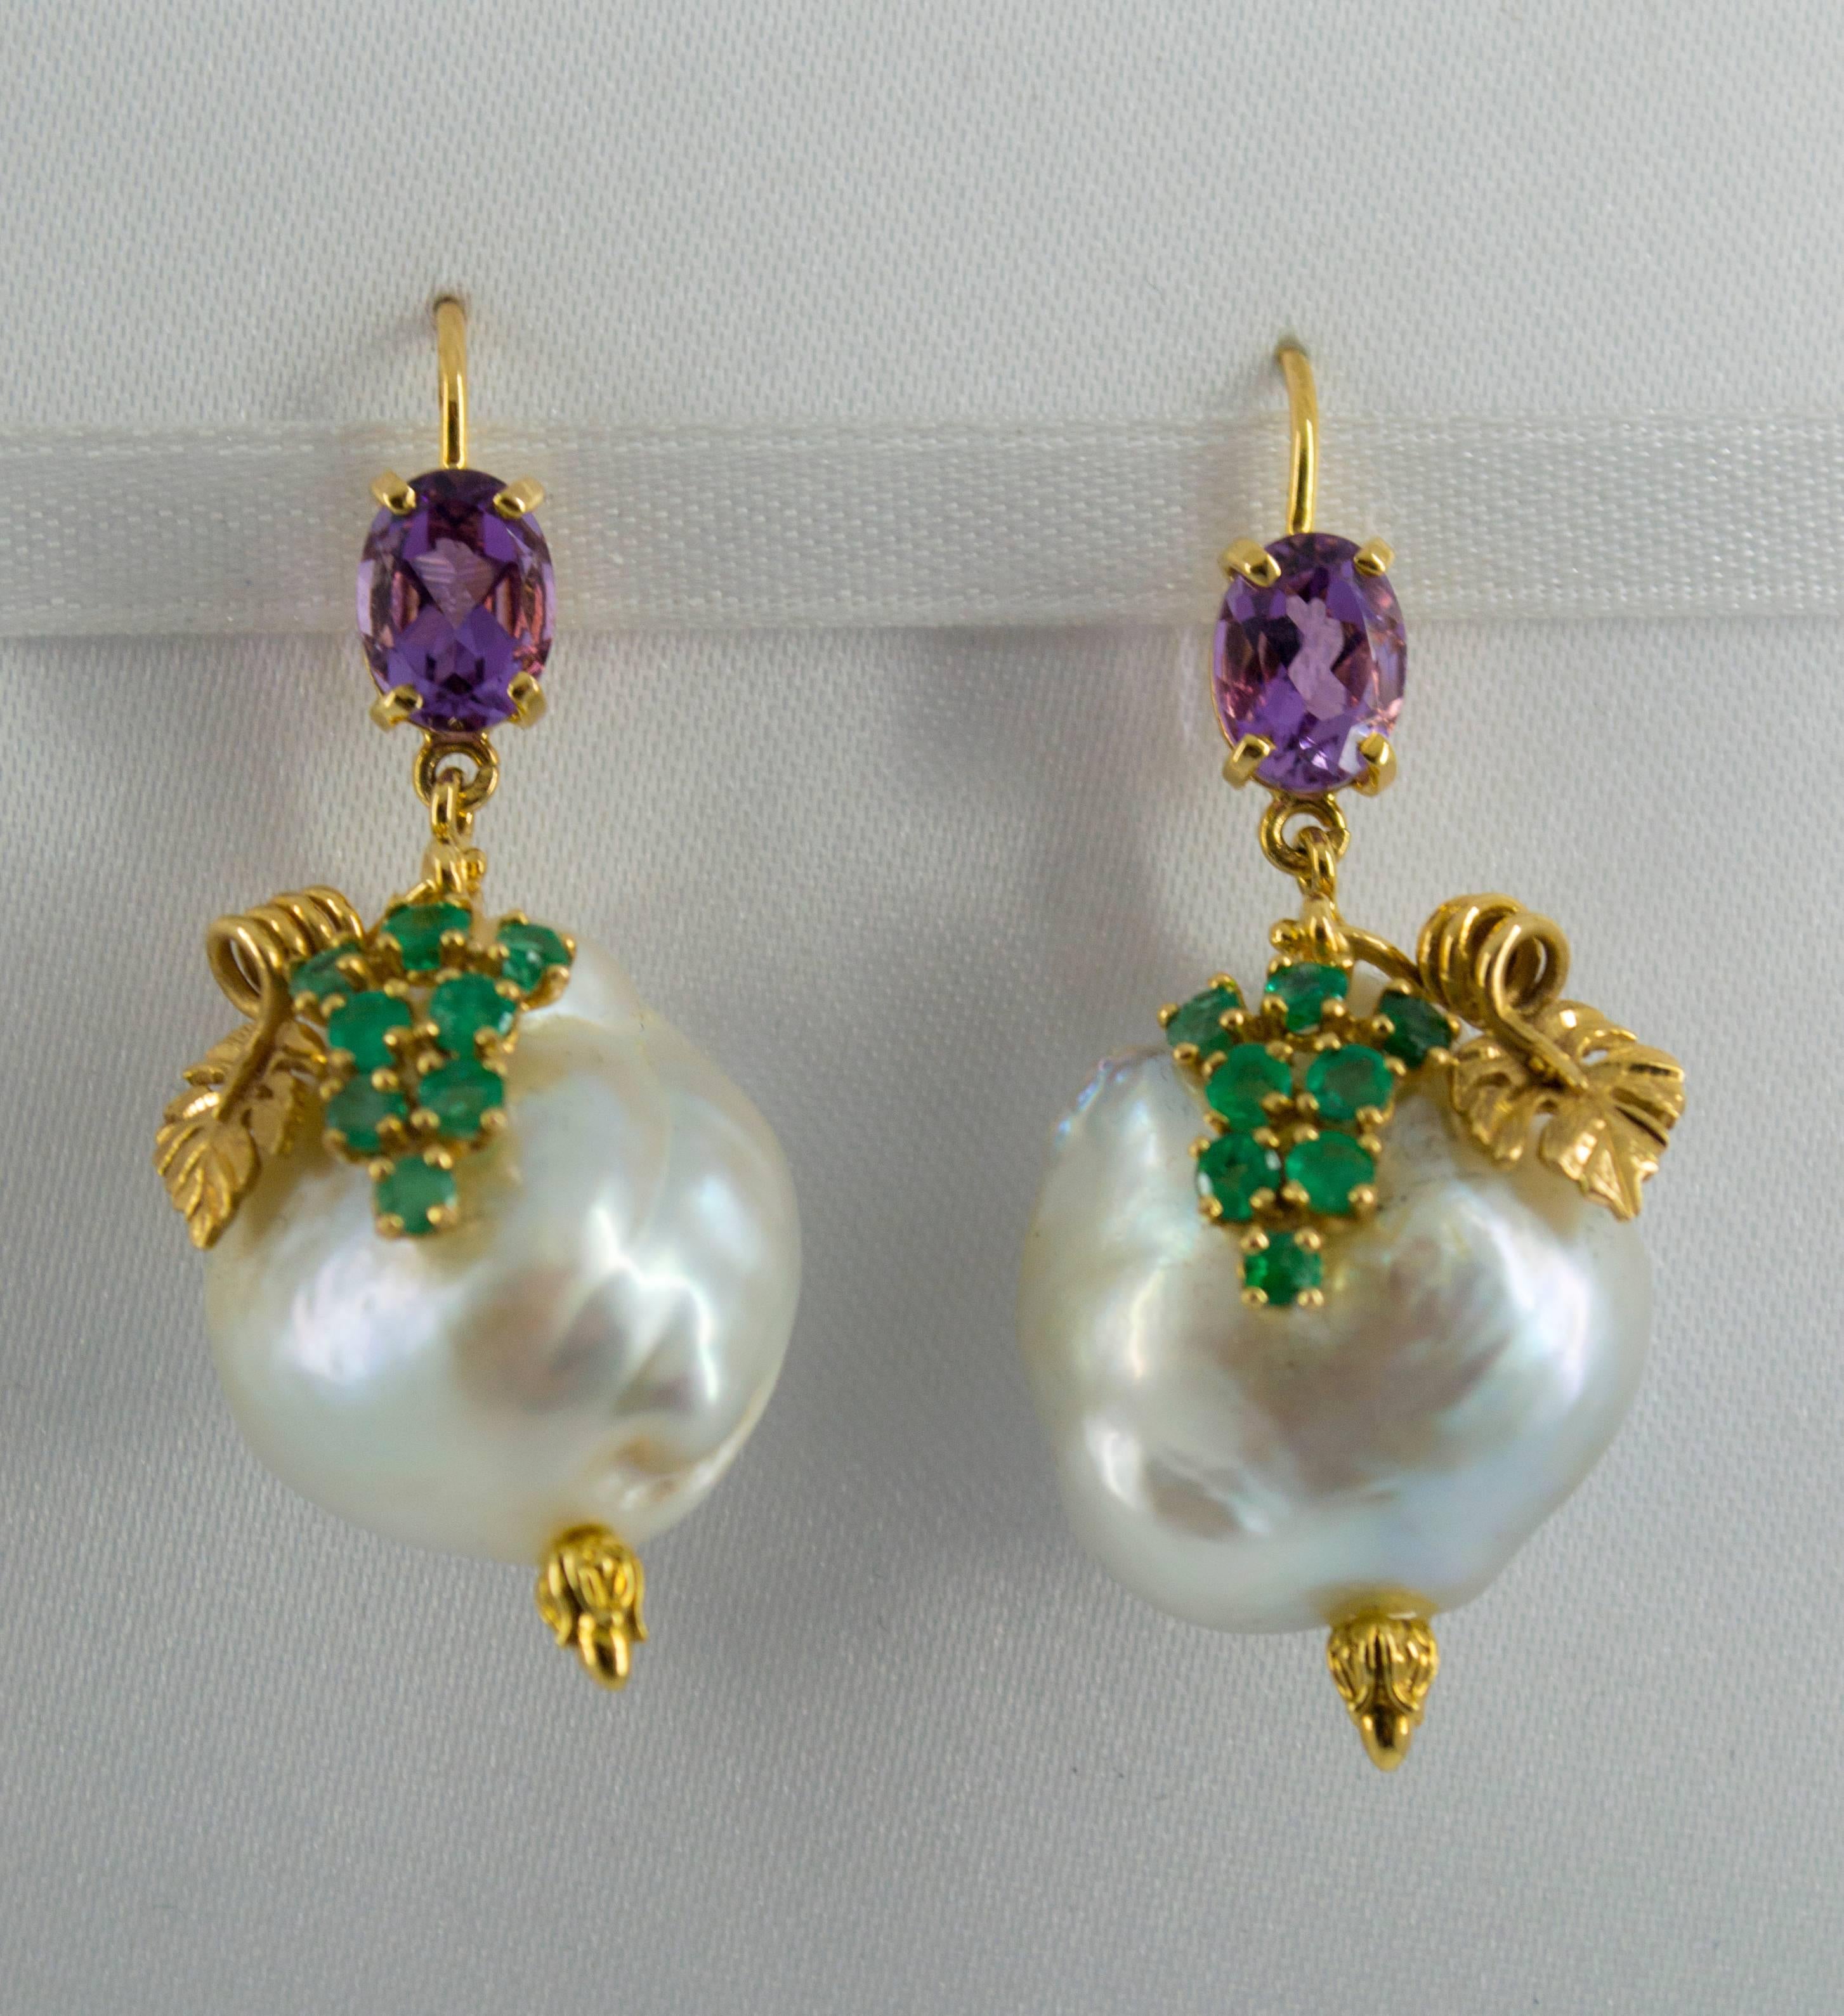 These earrings are made of 14K Yellow Gold.
They have 0.70 carats of emerald, amethysts and cultured pearls.
With these earrings, Luigi Ferrara wanted to pay homage to the Roman deity Bacchus (In Greek mythology Dionisio).
We're a workshop so every